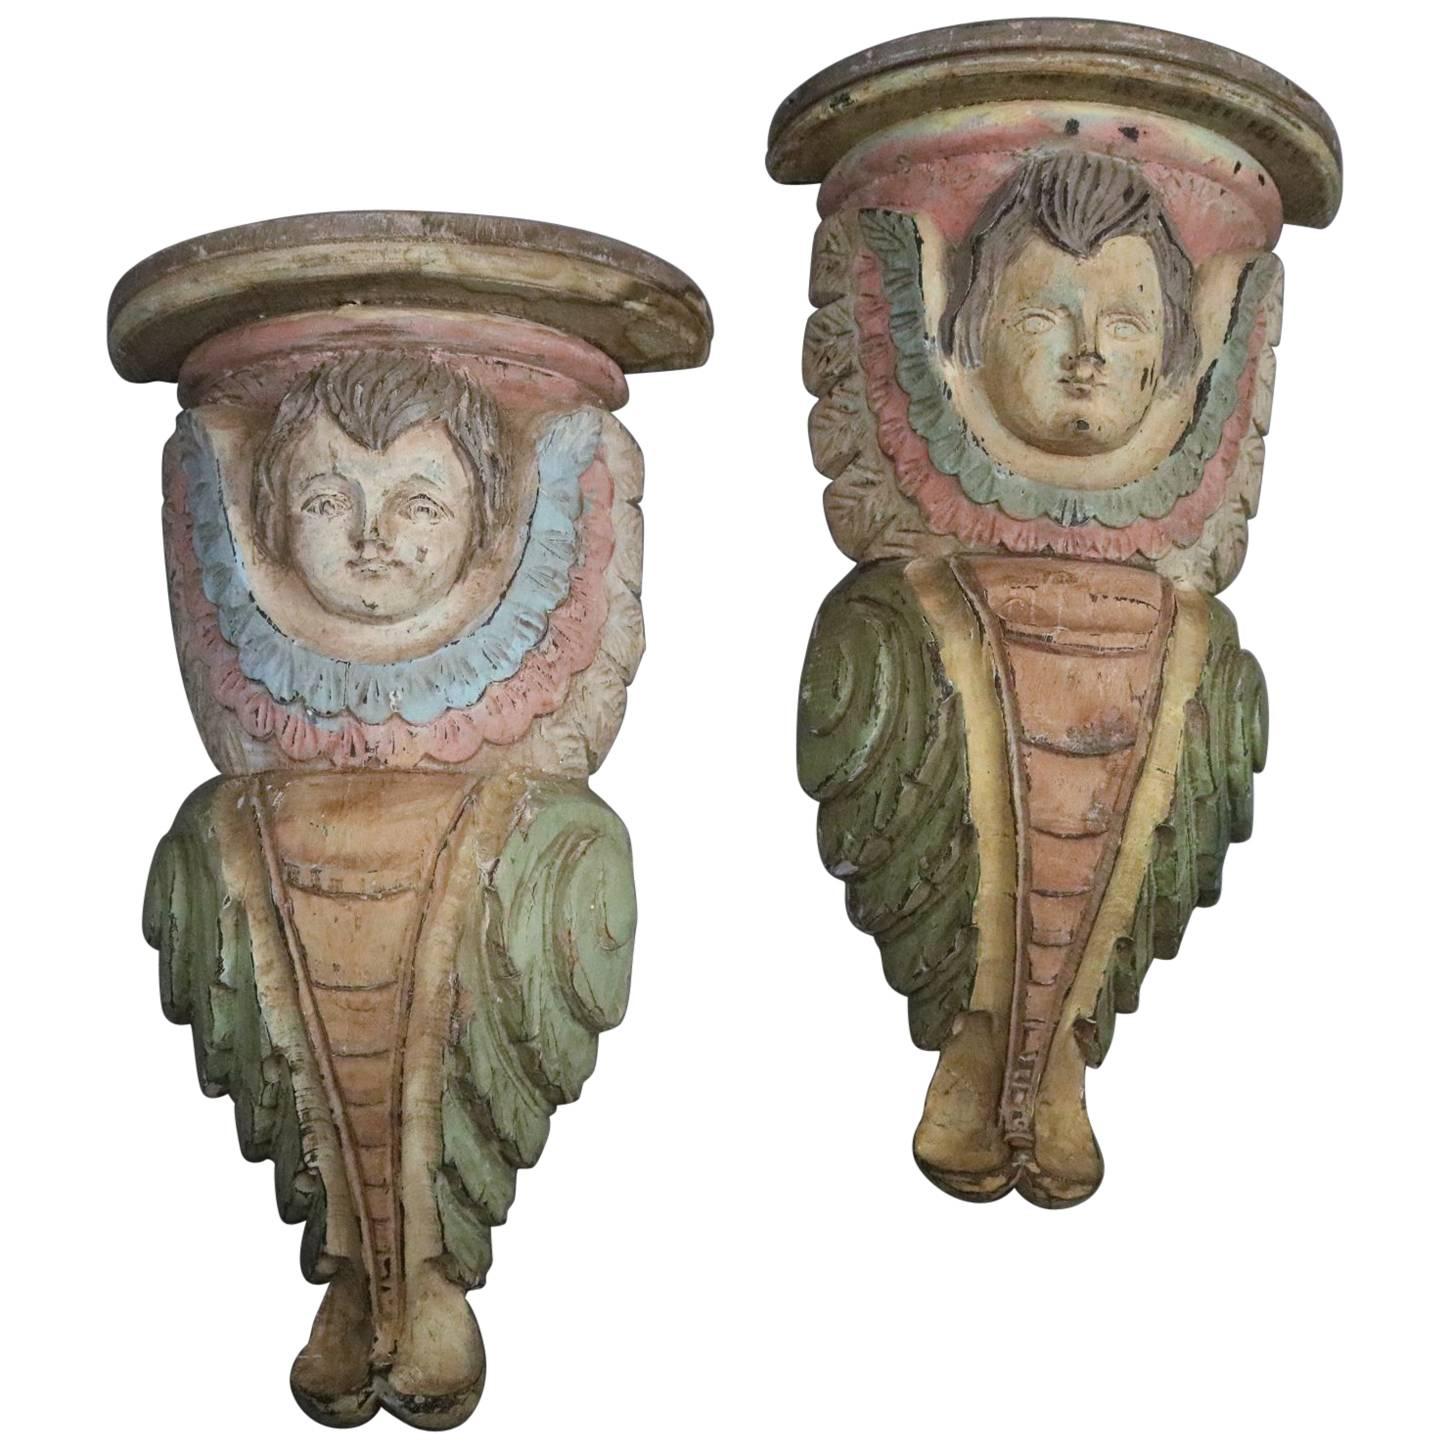 Pair of Vintage Polychrome Carved Figural Cherub Candle Wall Shelves, circa 1950